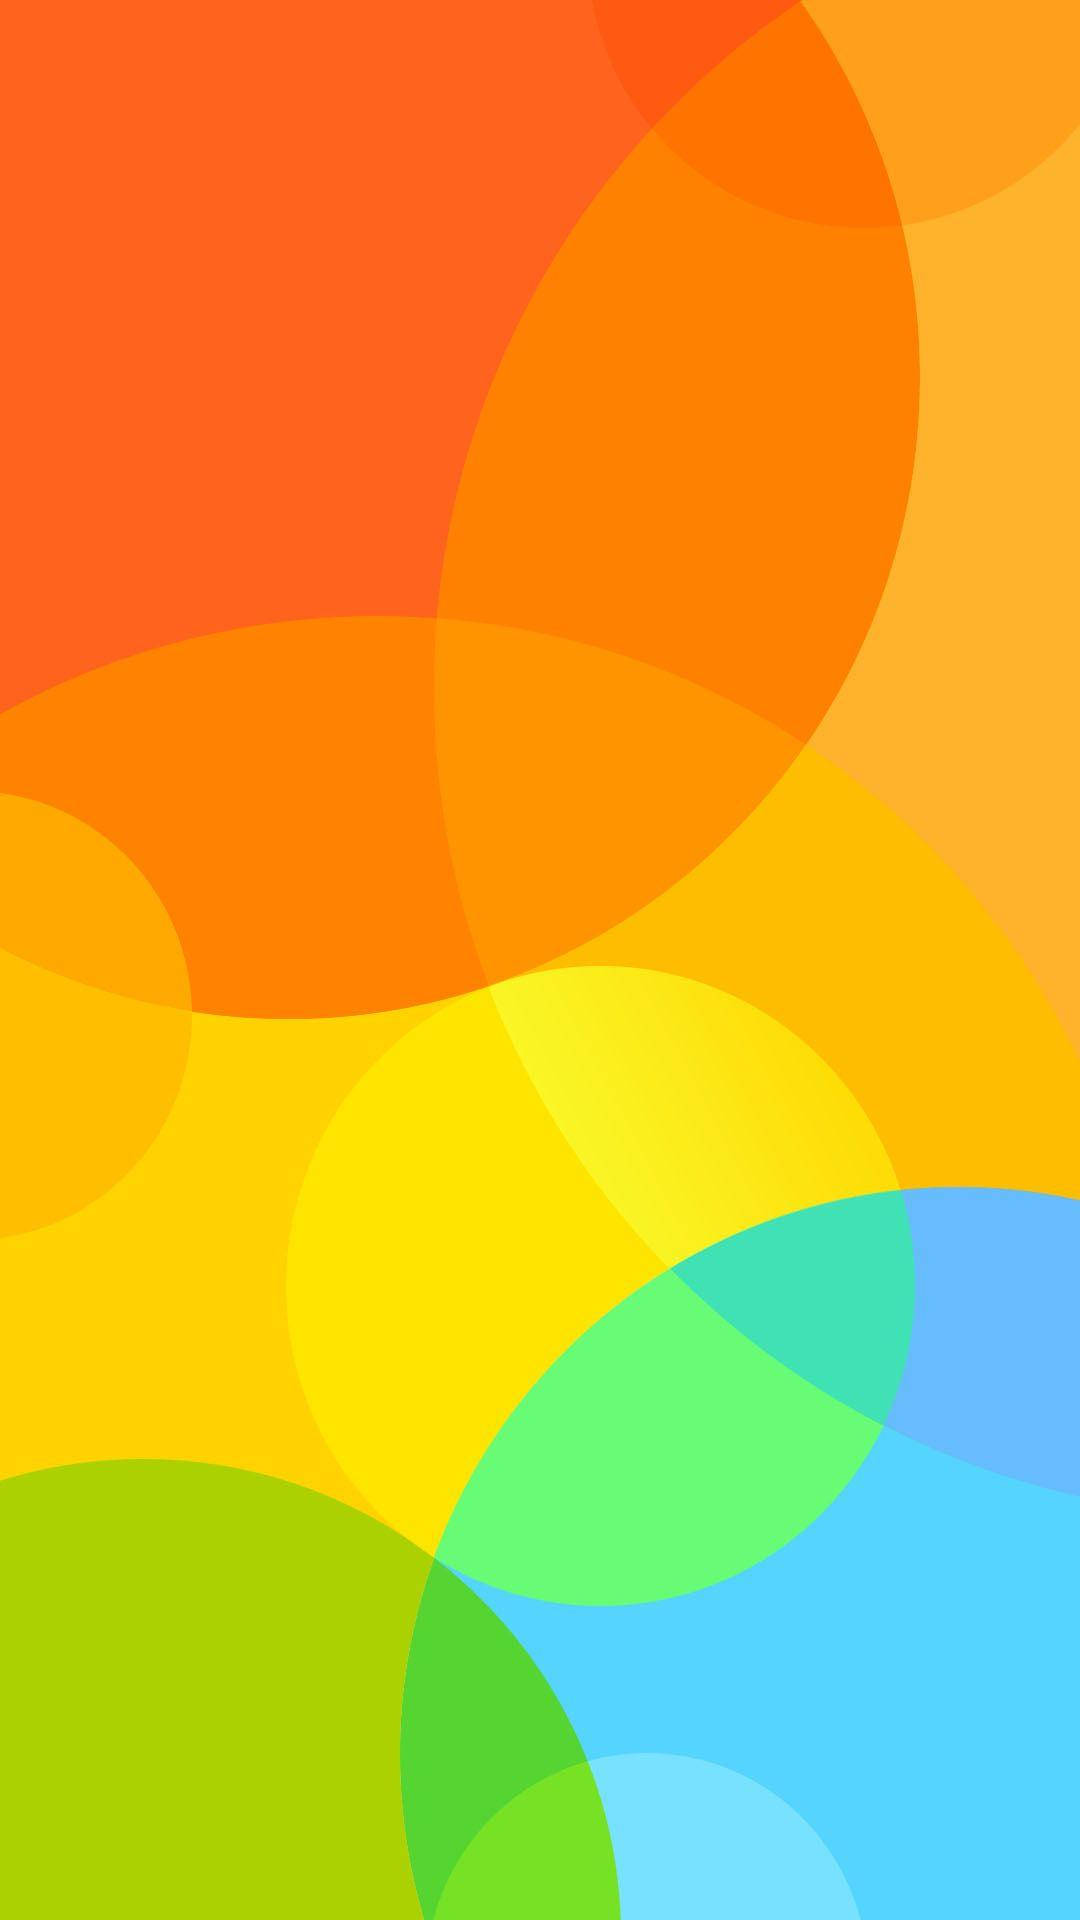 Overlapping Colored Circles Miui Wallpaper